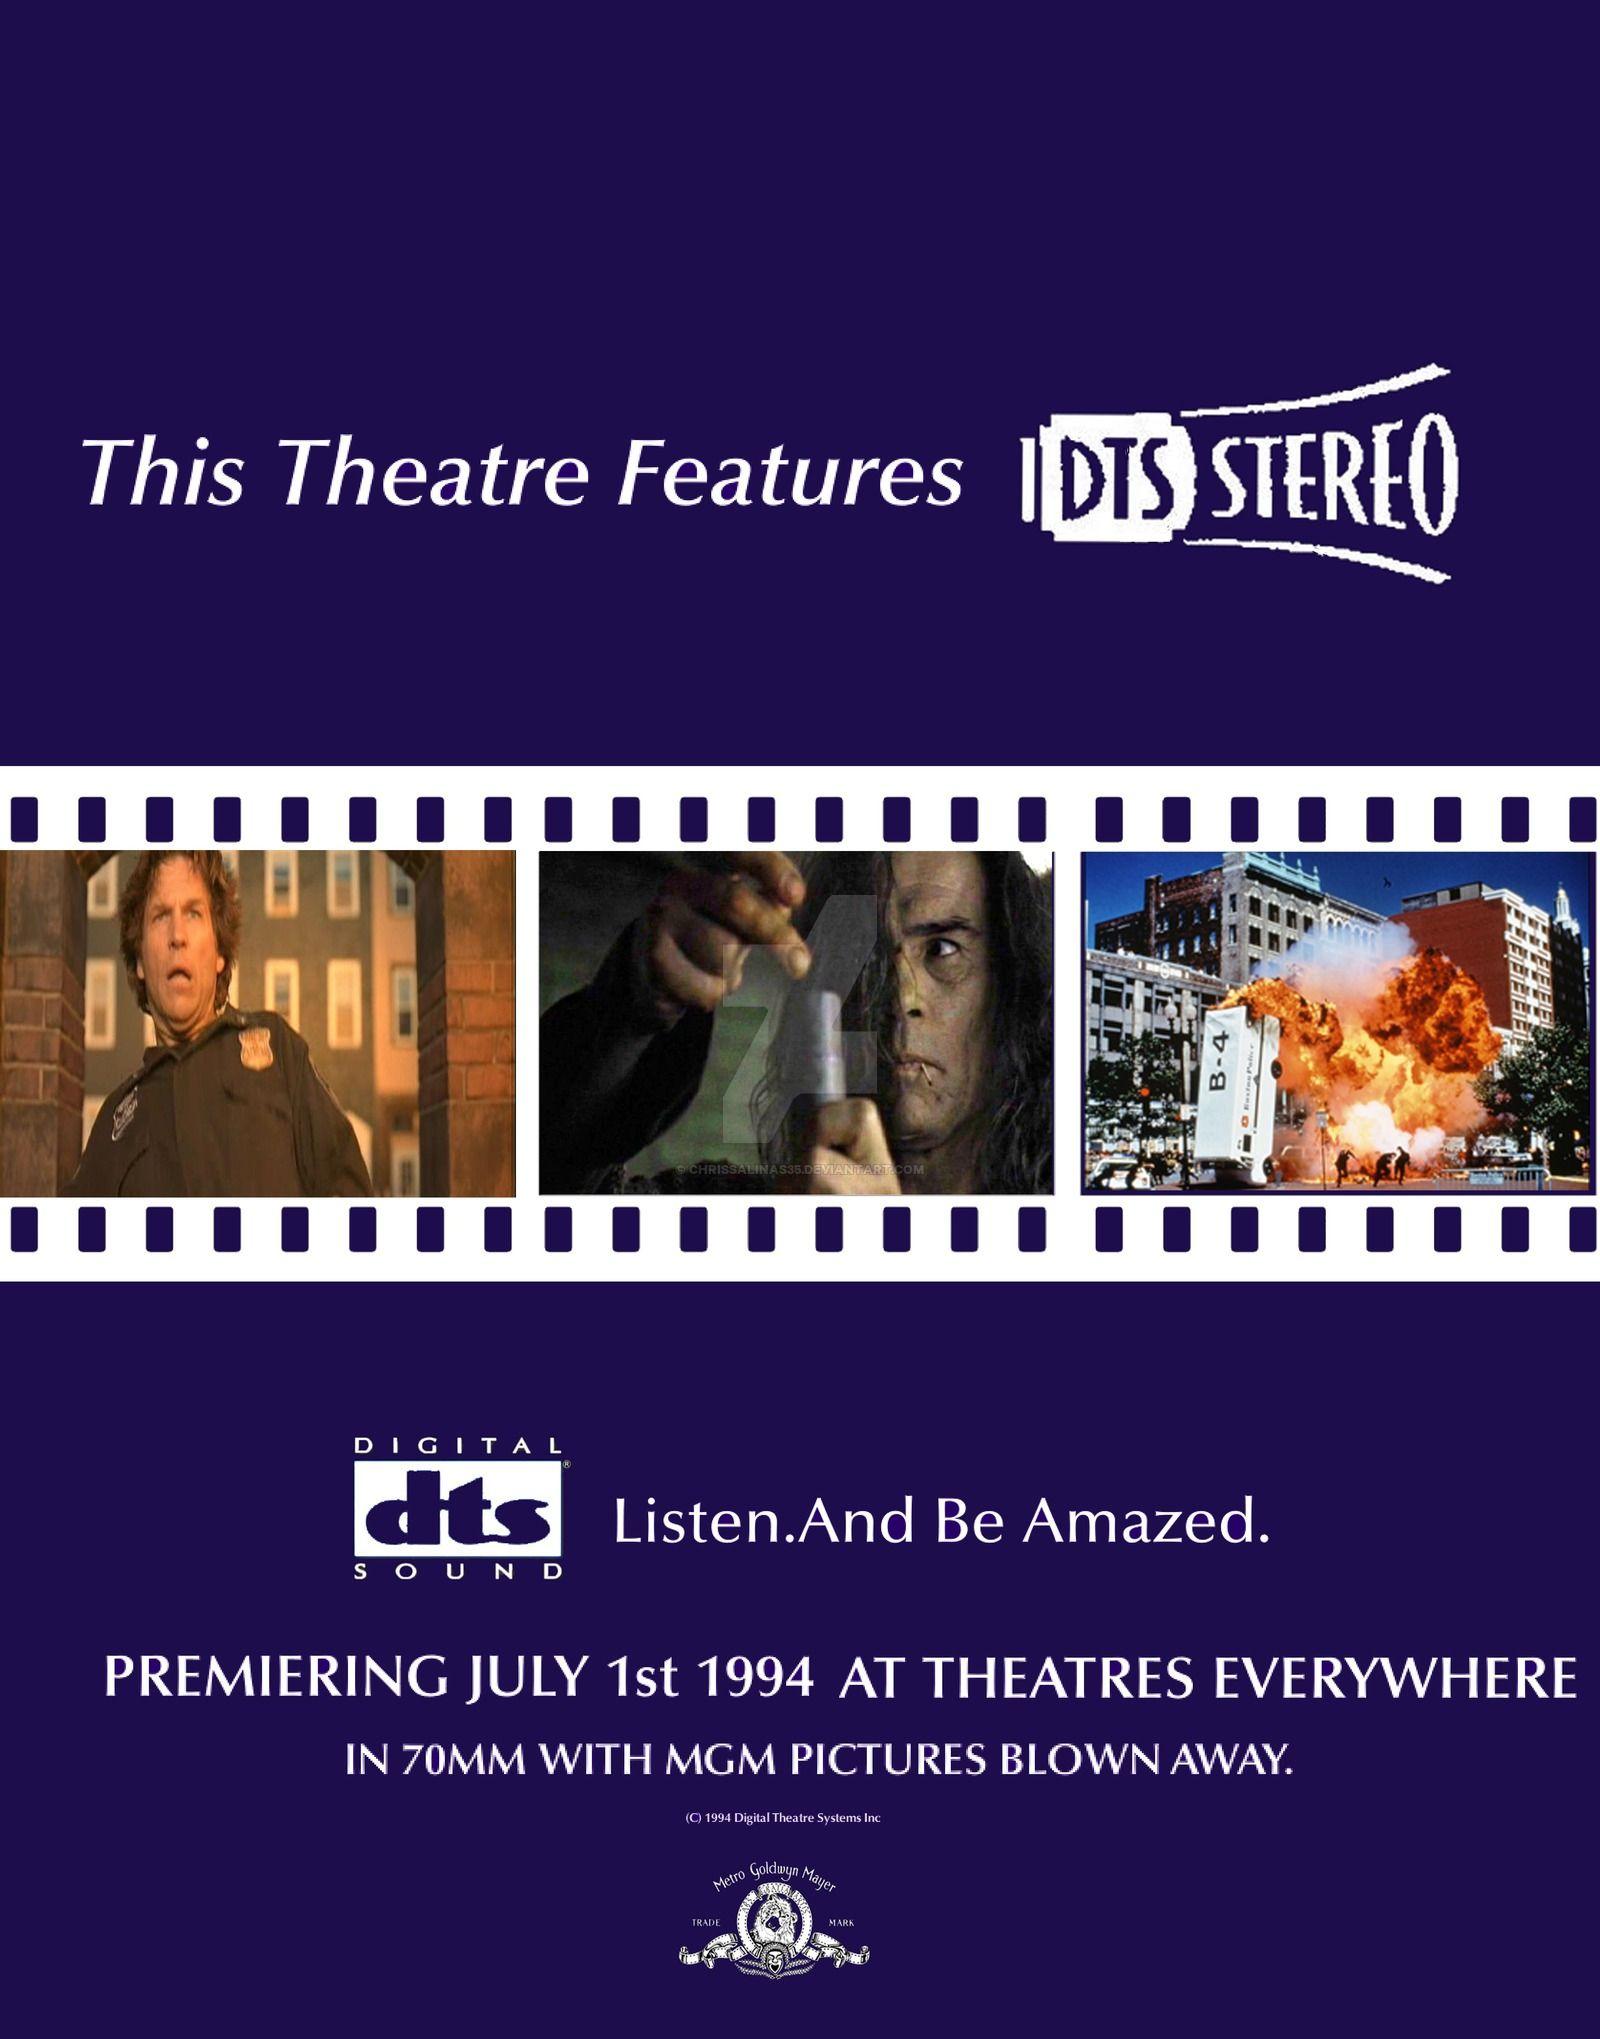 DTS Stereo Logo - DTS Stereo 1994 Theatrical Poster